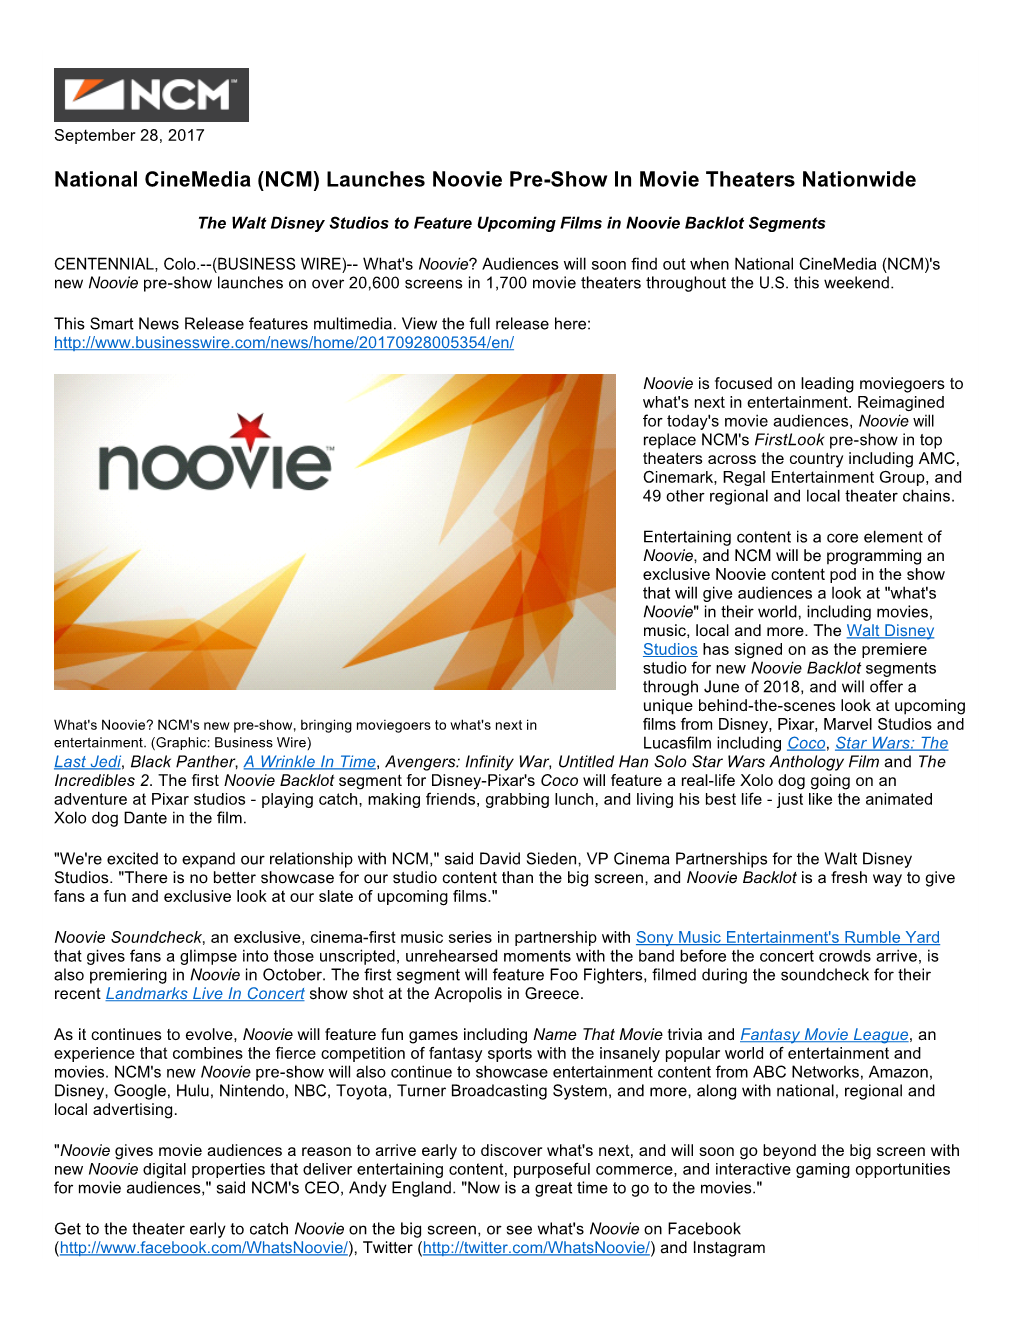 Launches Noovie Pre-Show in Movie Theaters Nationwide